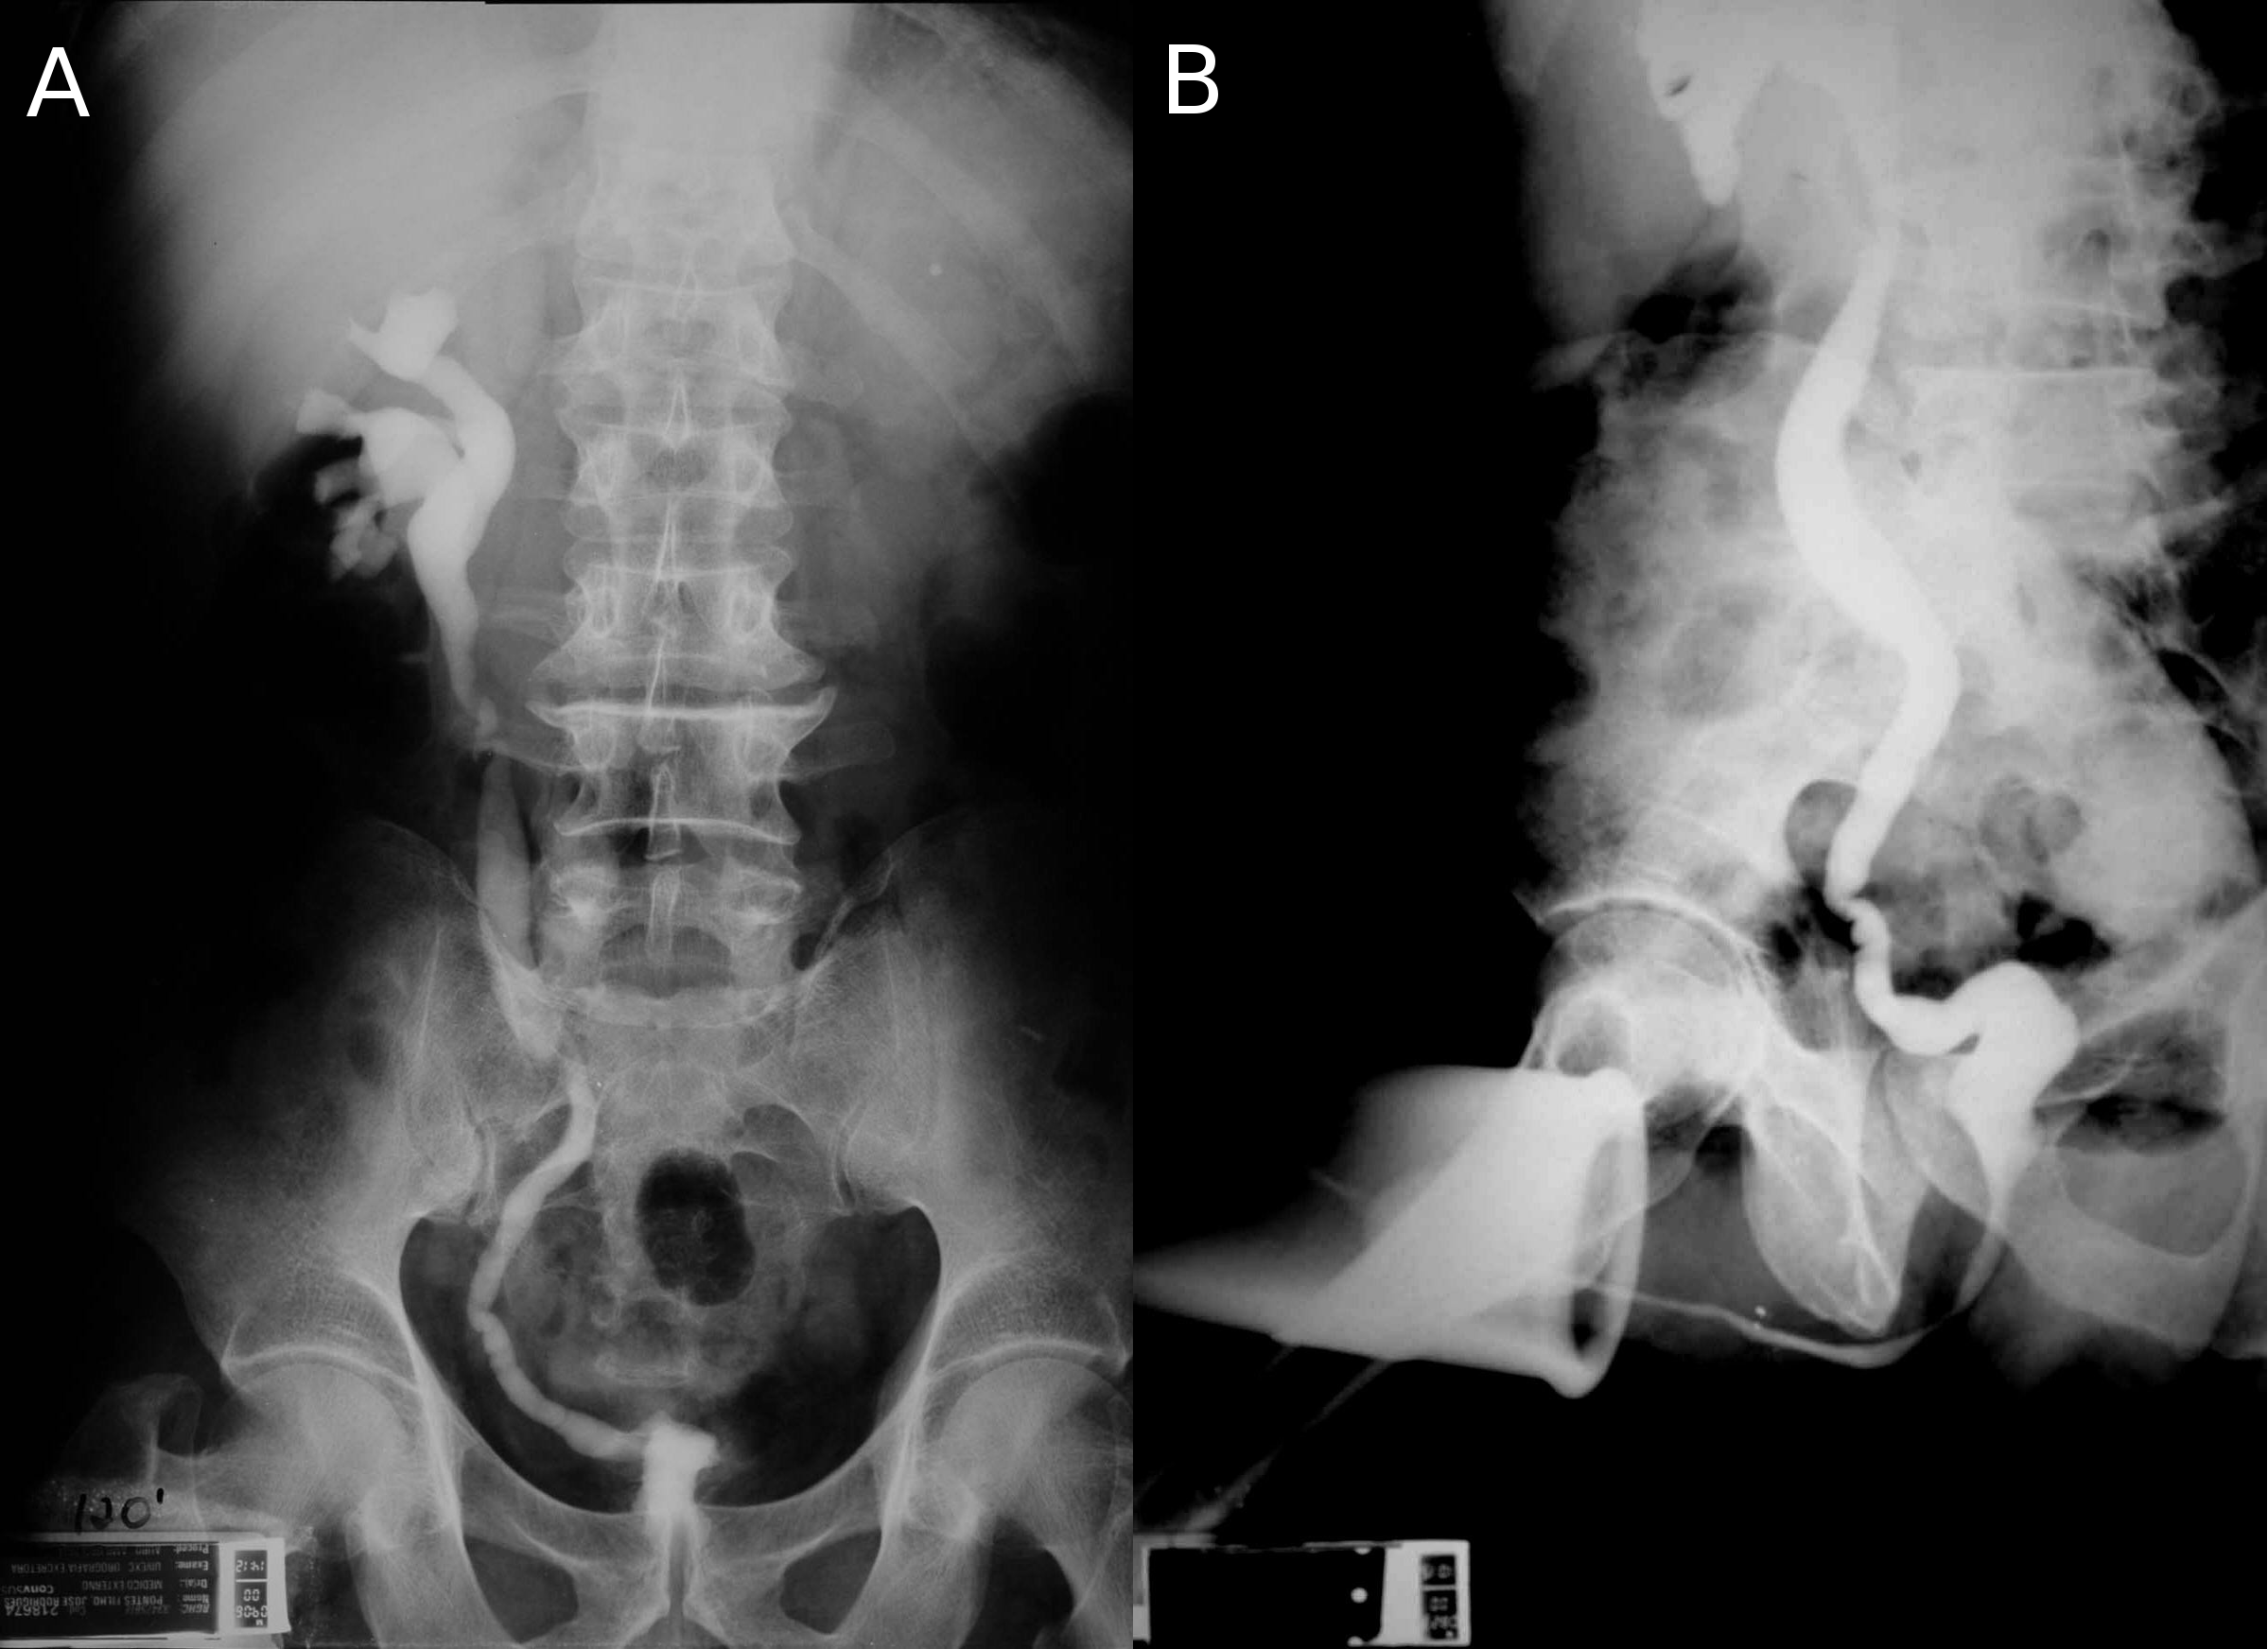 Figure 1: A: Intravenous urography with left non-function kidney, right uretero-hydronephosis and a very small contracted bladder. B: Voiding cystography shows contracted bladder and right vesico-ureteral reflux